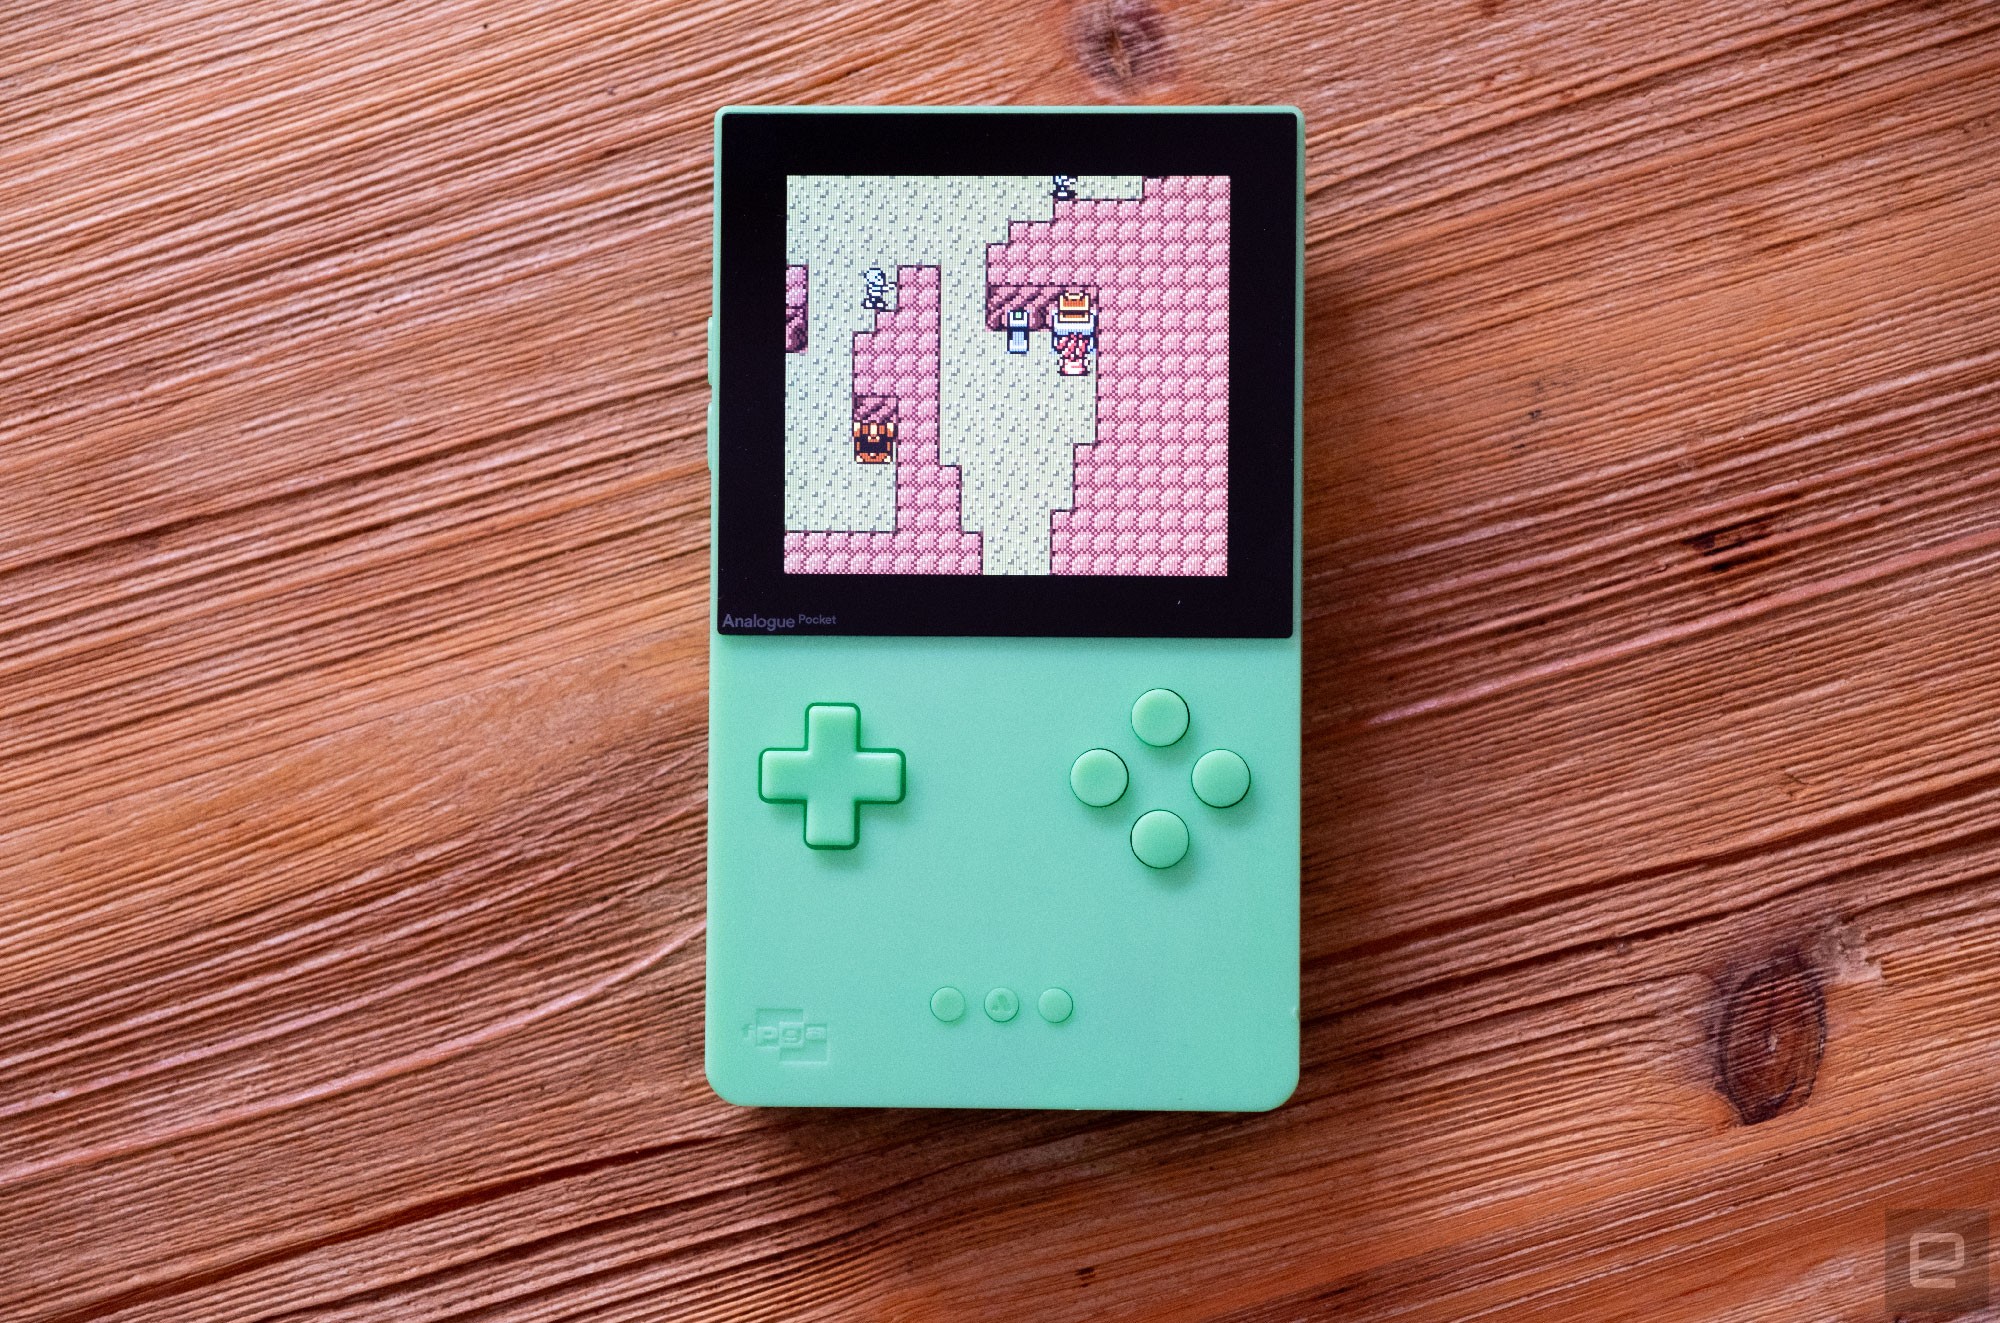 Dragonyhm Game Boy Color game played on a portable analog pocket console.